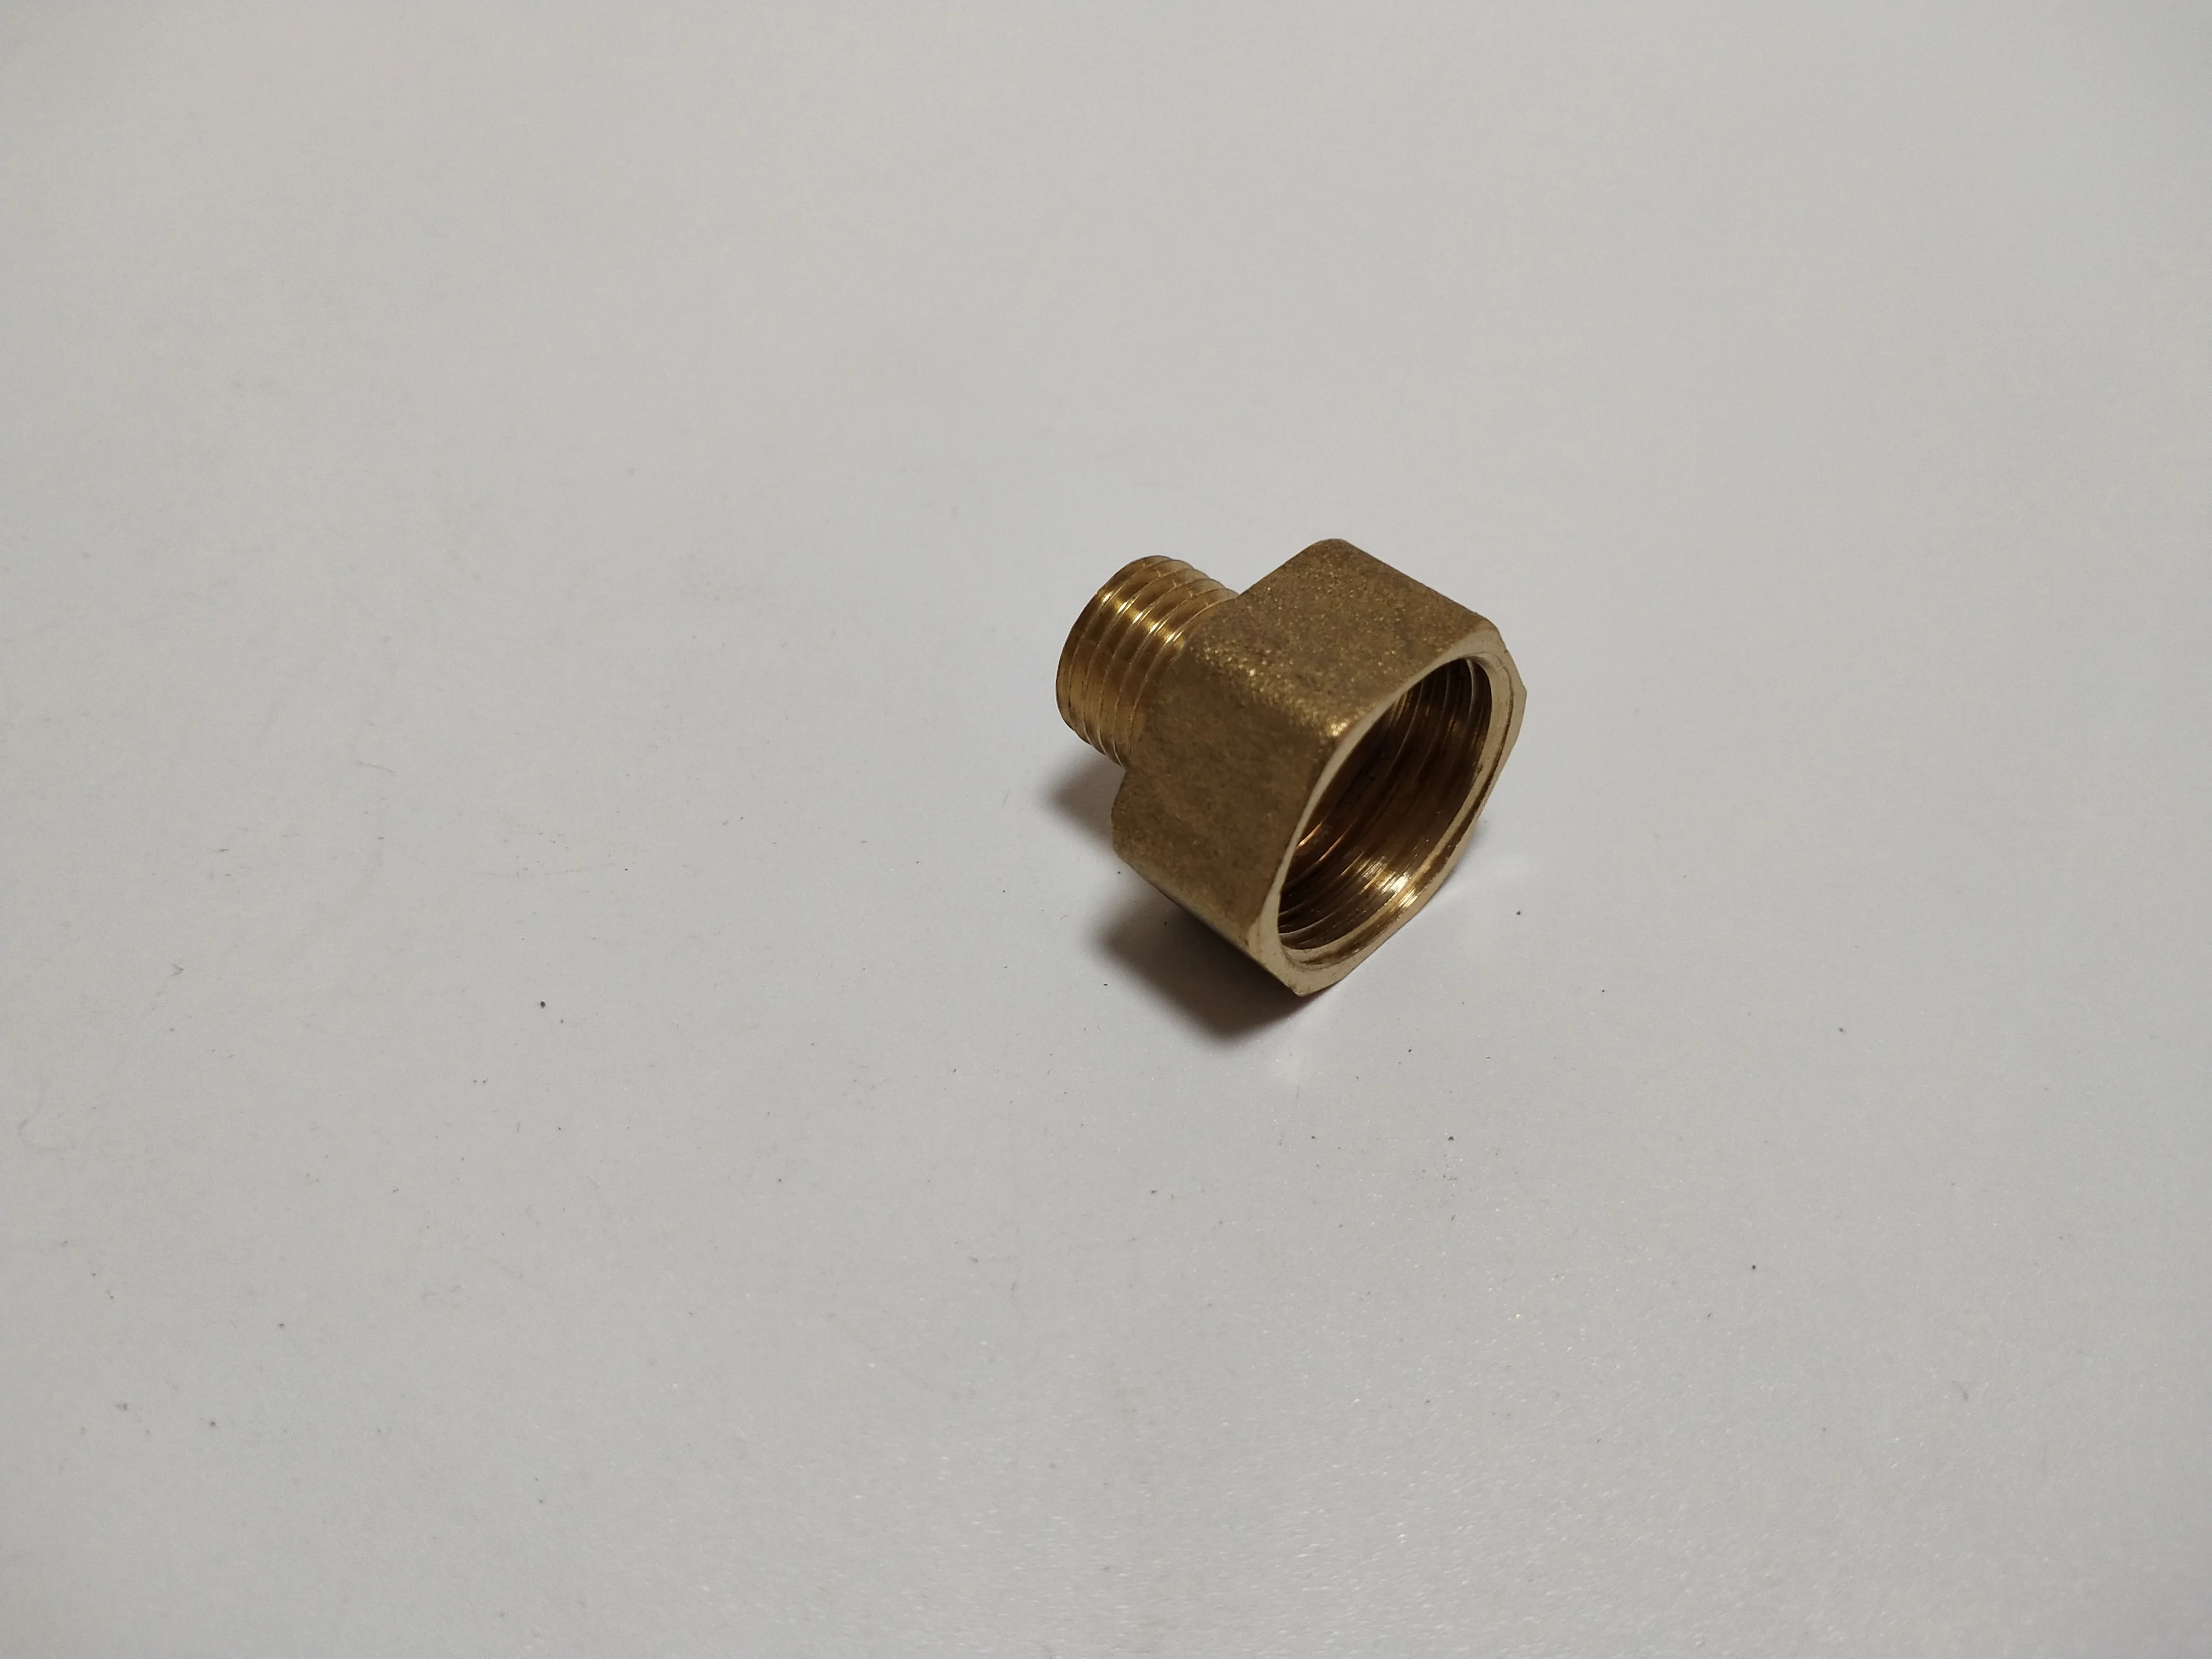 Male Bspp to Metric Female Reducing Bushes in Brass Parallel threads With Washer 